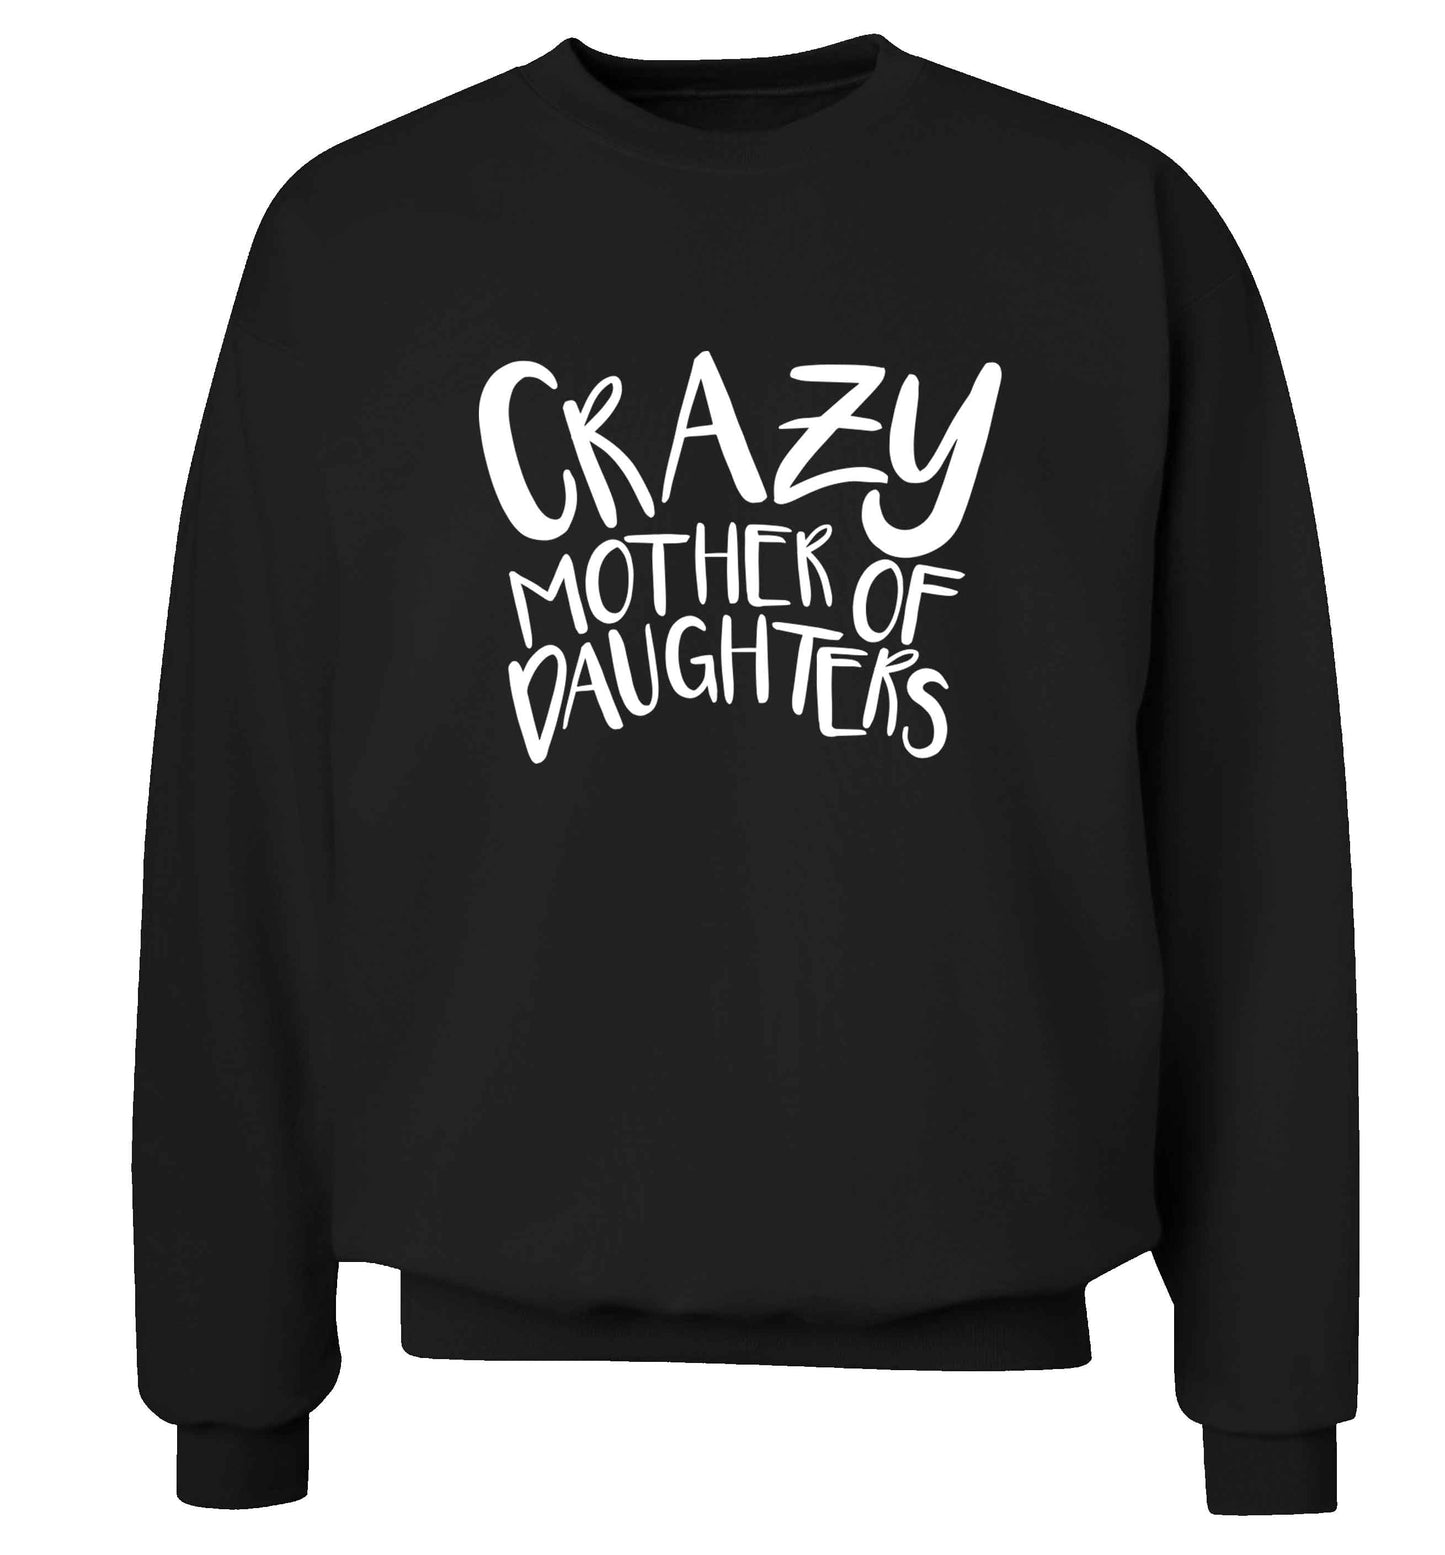 Crazy mother of daughters adult's unisex black sweater 2XL